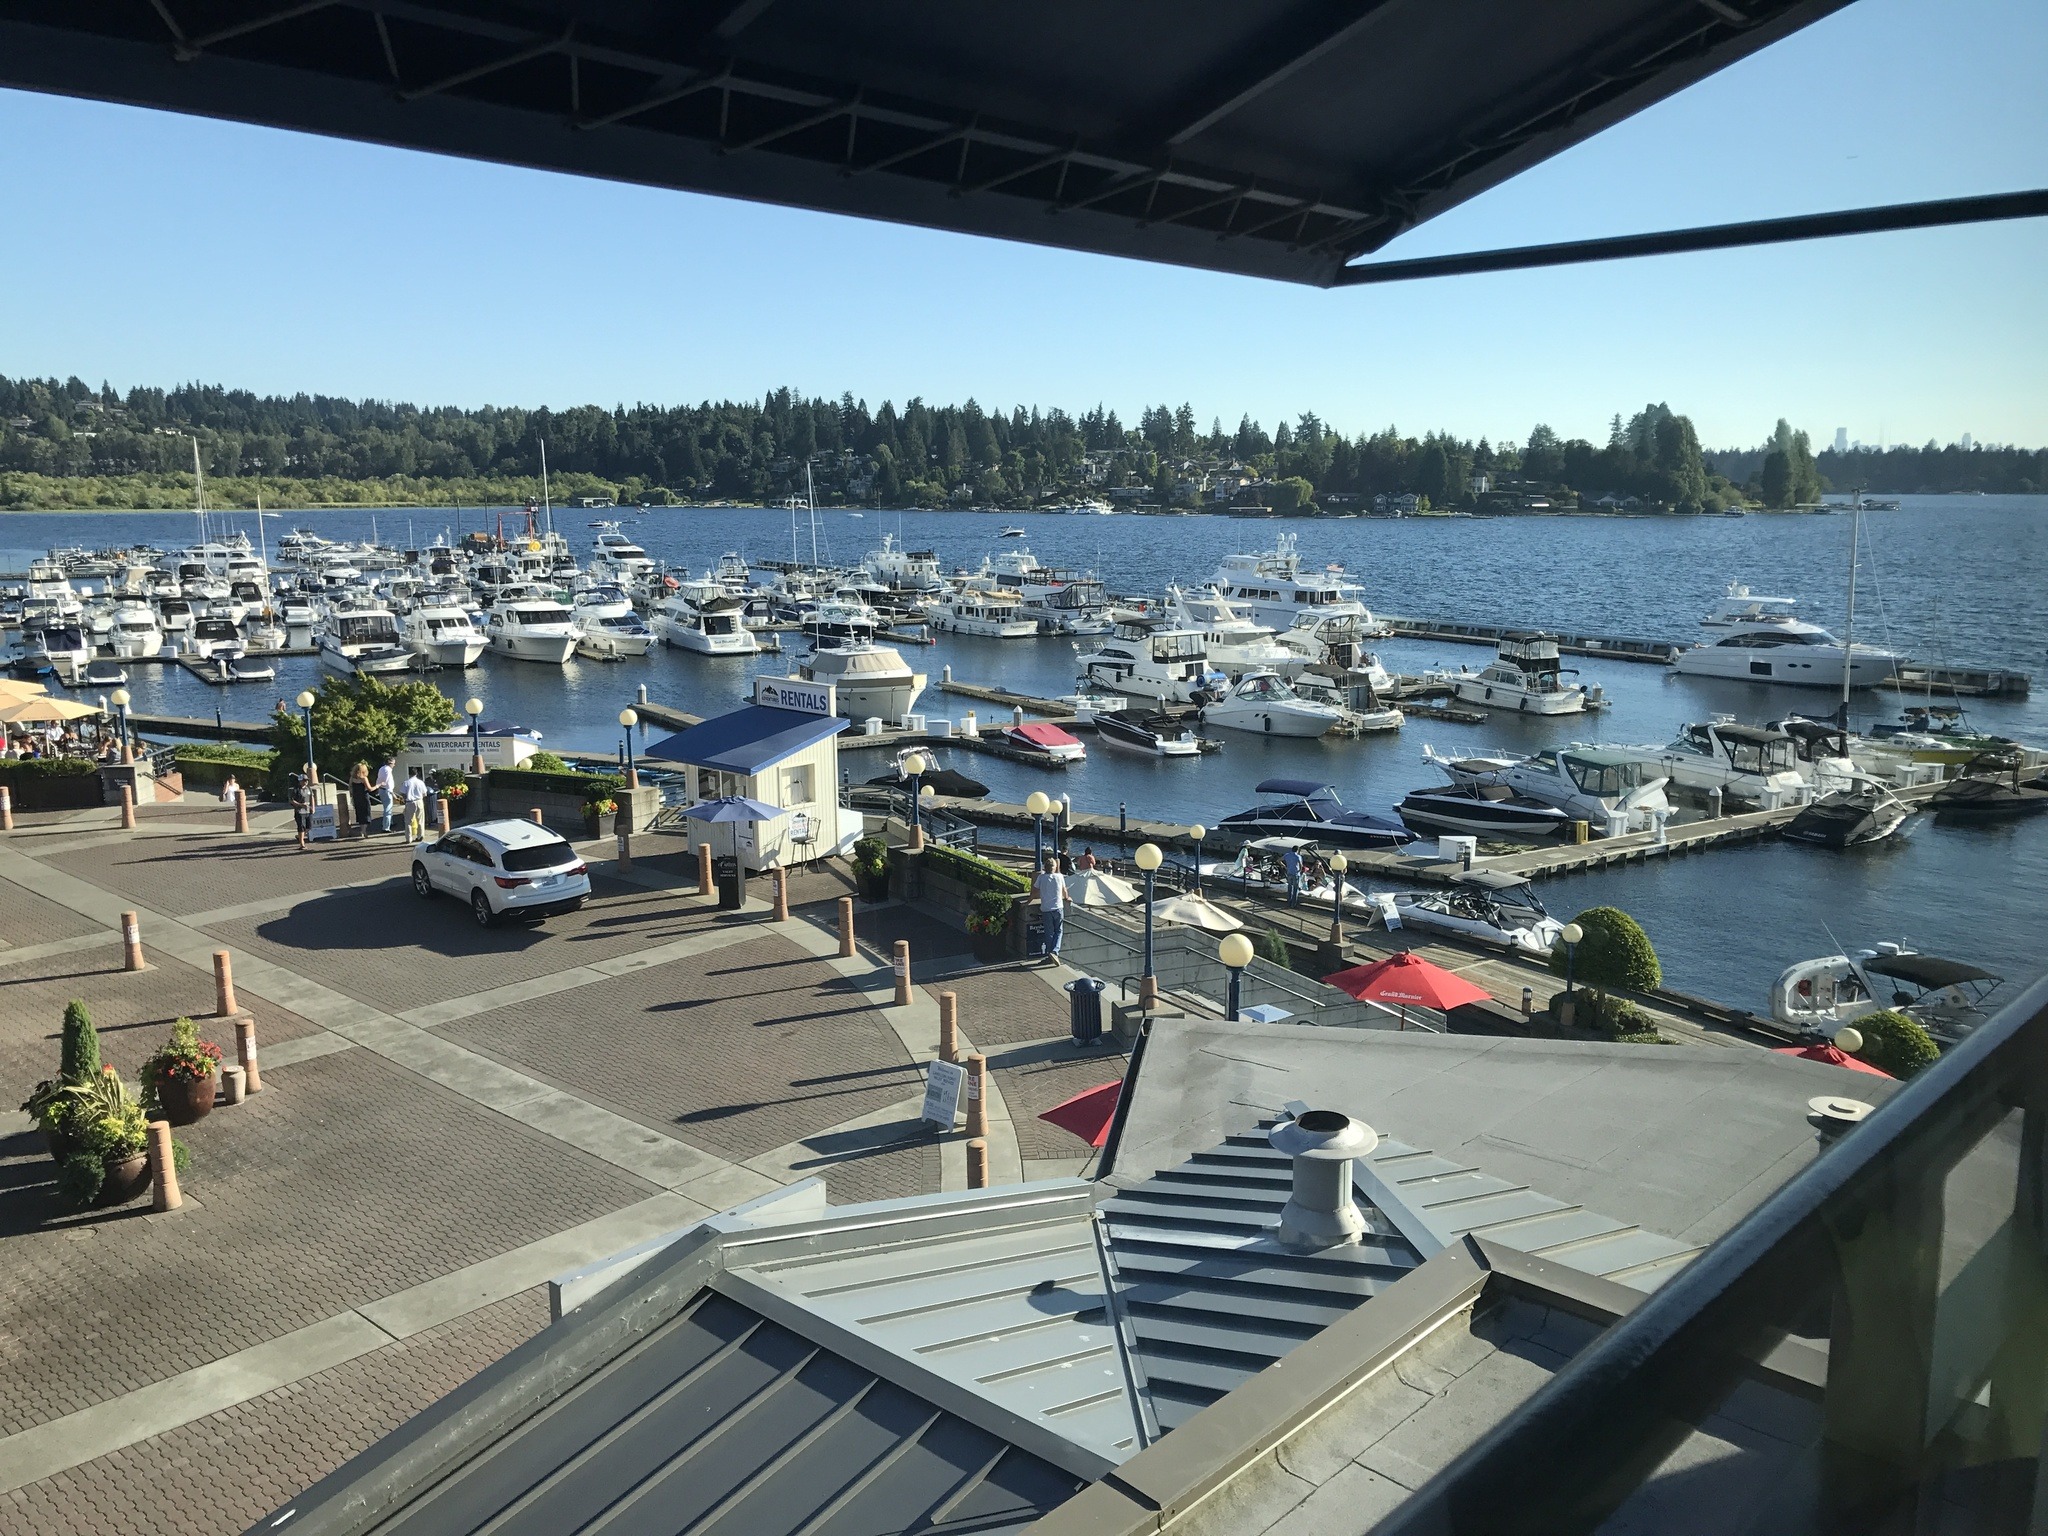 Spontaneous Kirkland staycation at The Woodmark, Carillon Point